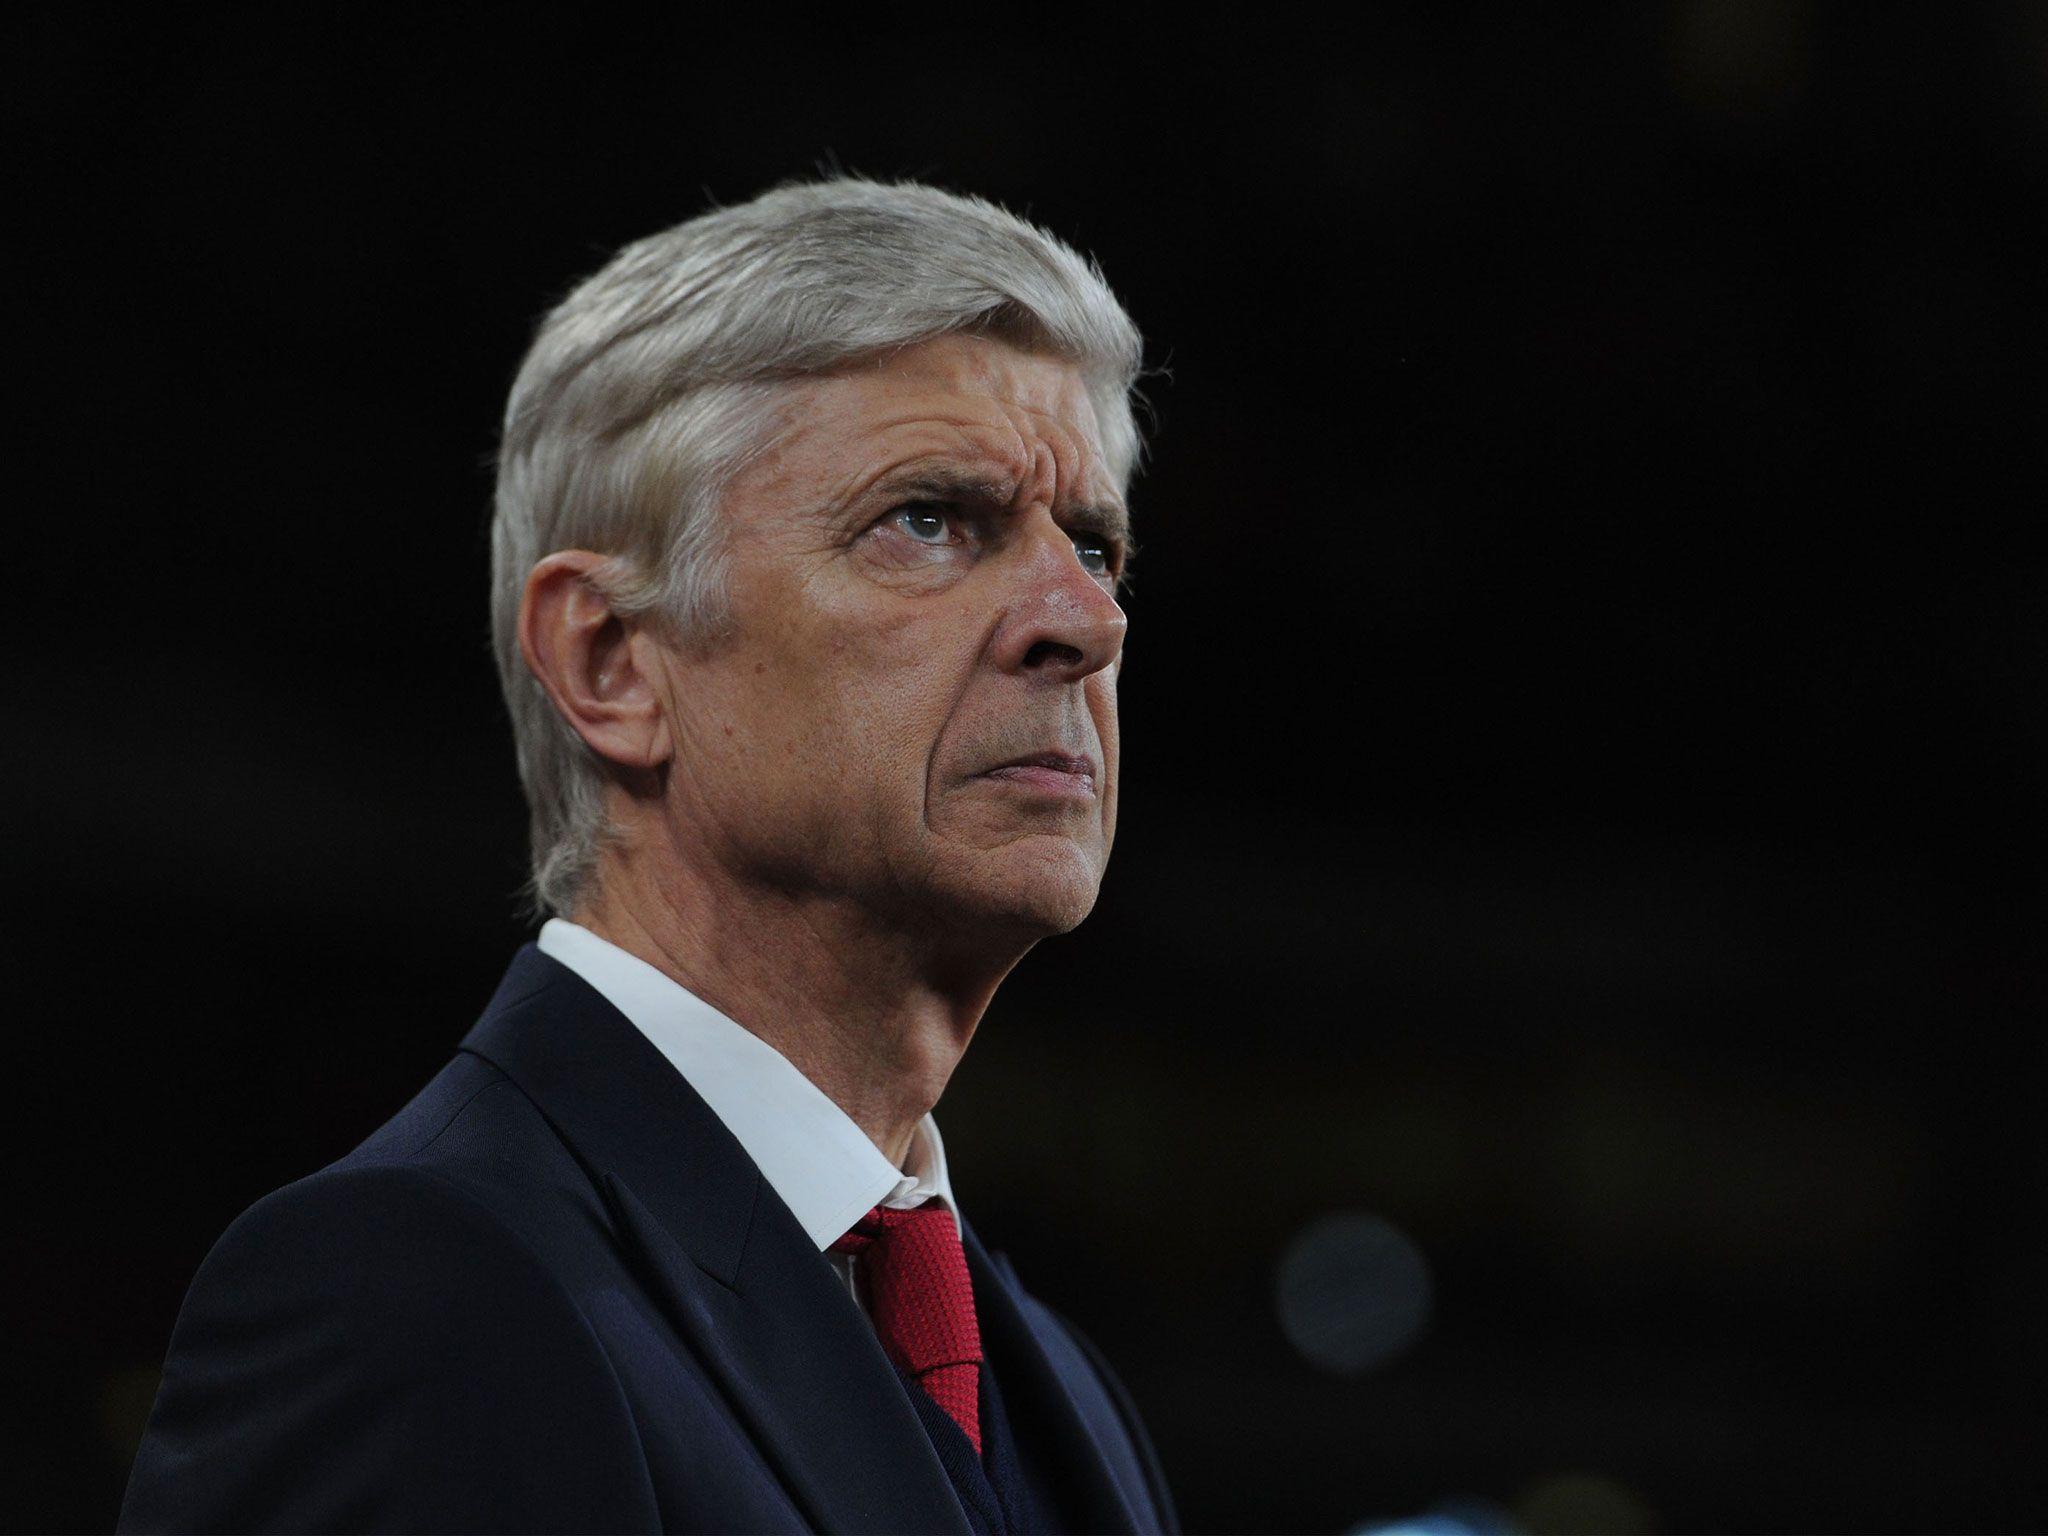 Arsene Wenger or Socrates: Which philosopher said it?